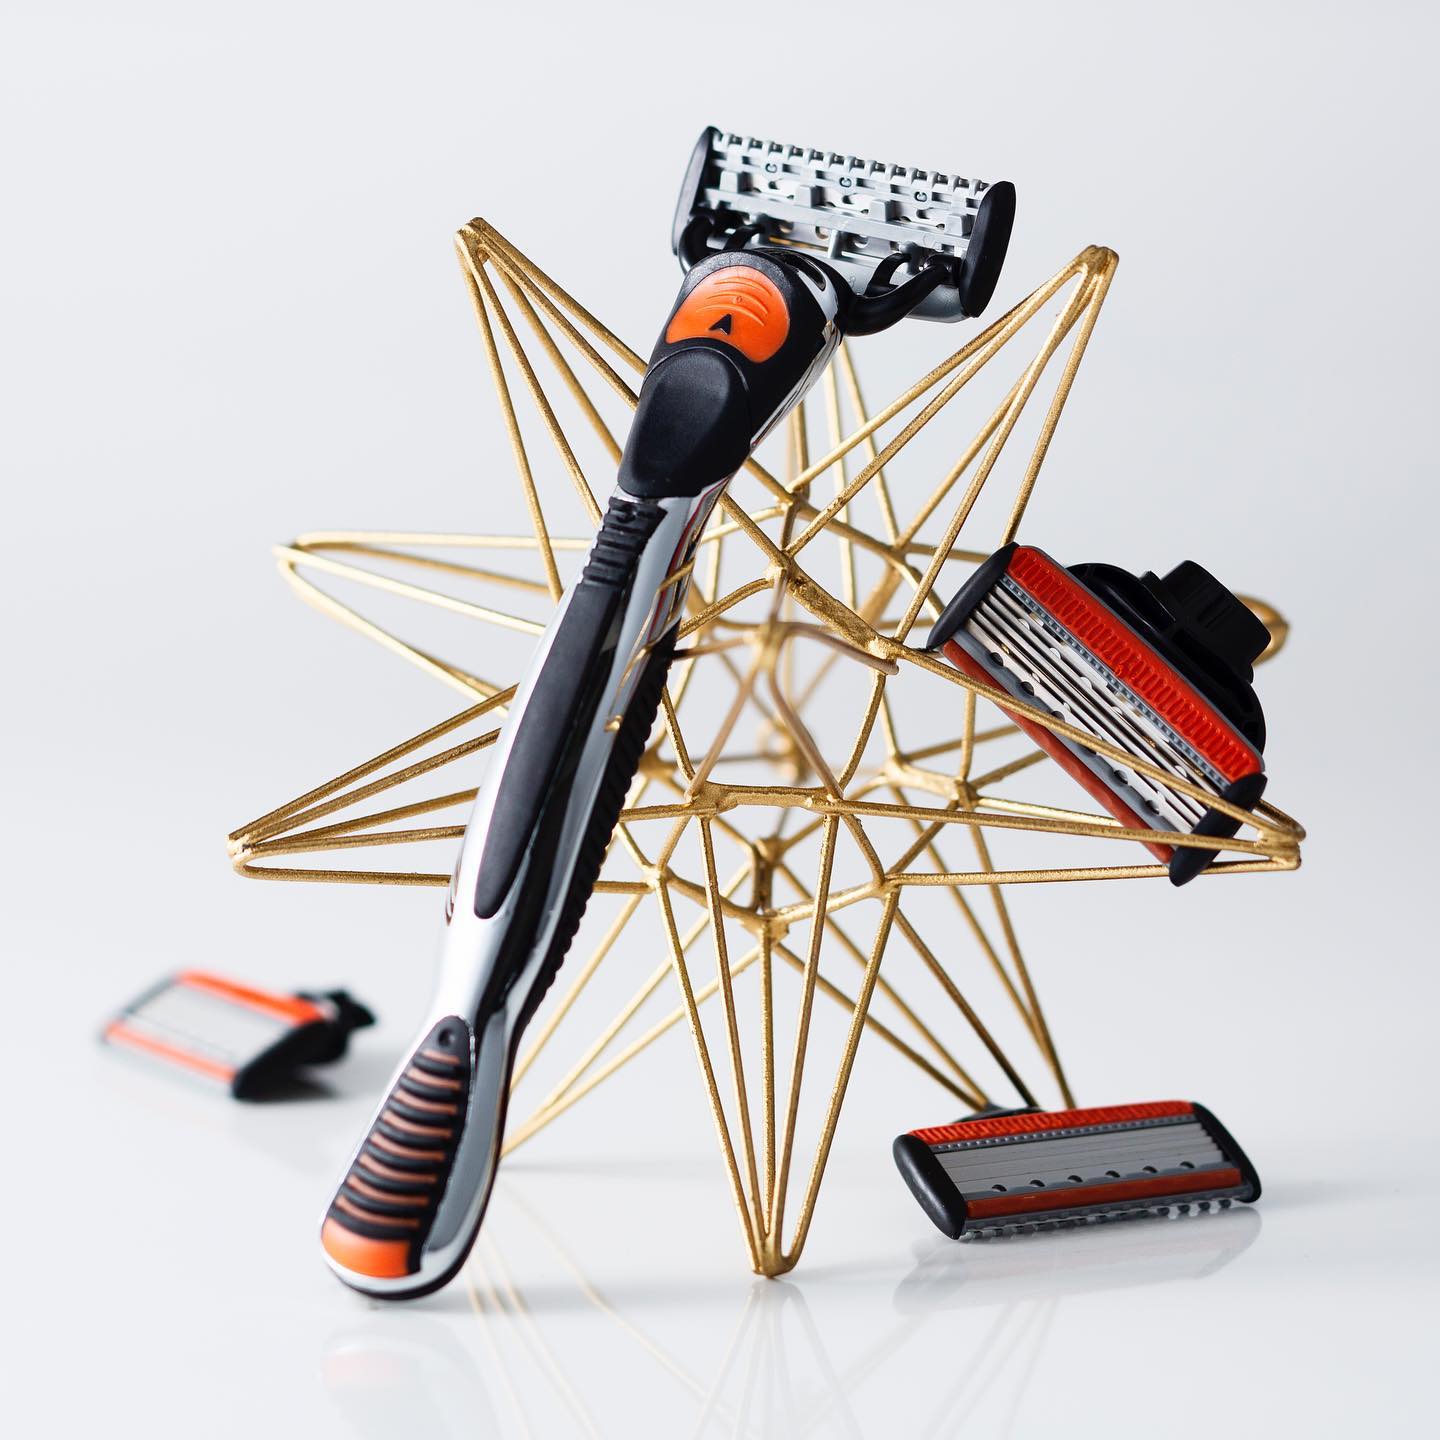 Orange and black GALLEIDO men's shaving razor arranged on a wicker star with replaceable blades